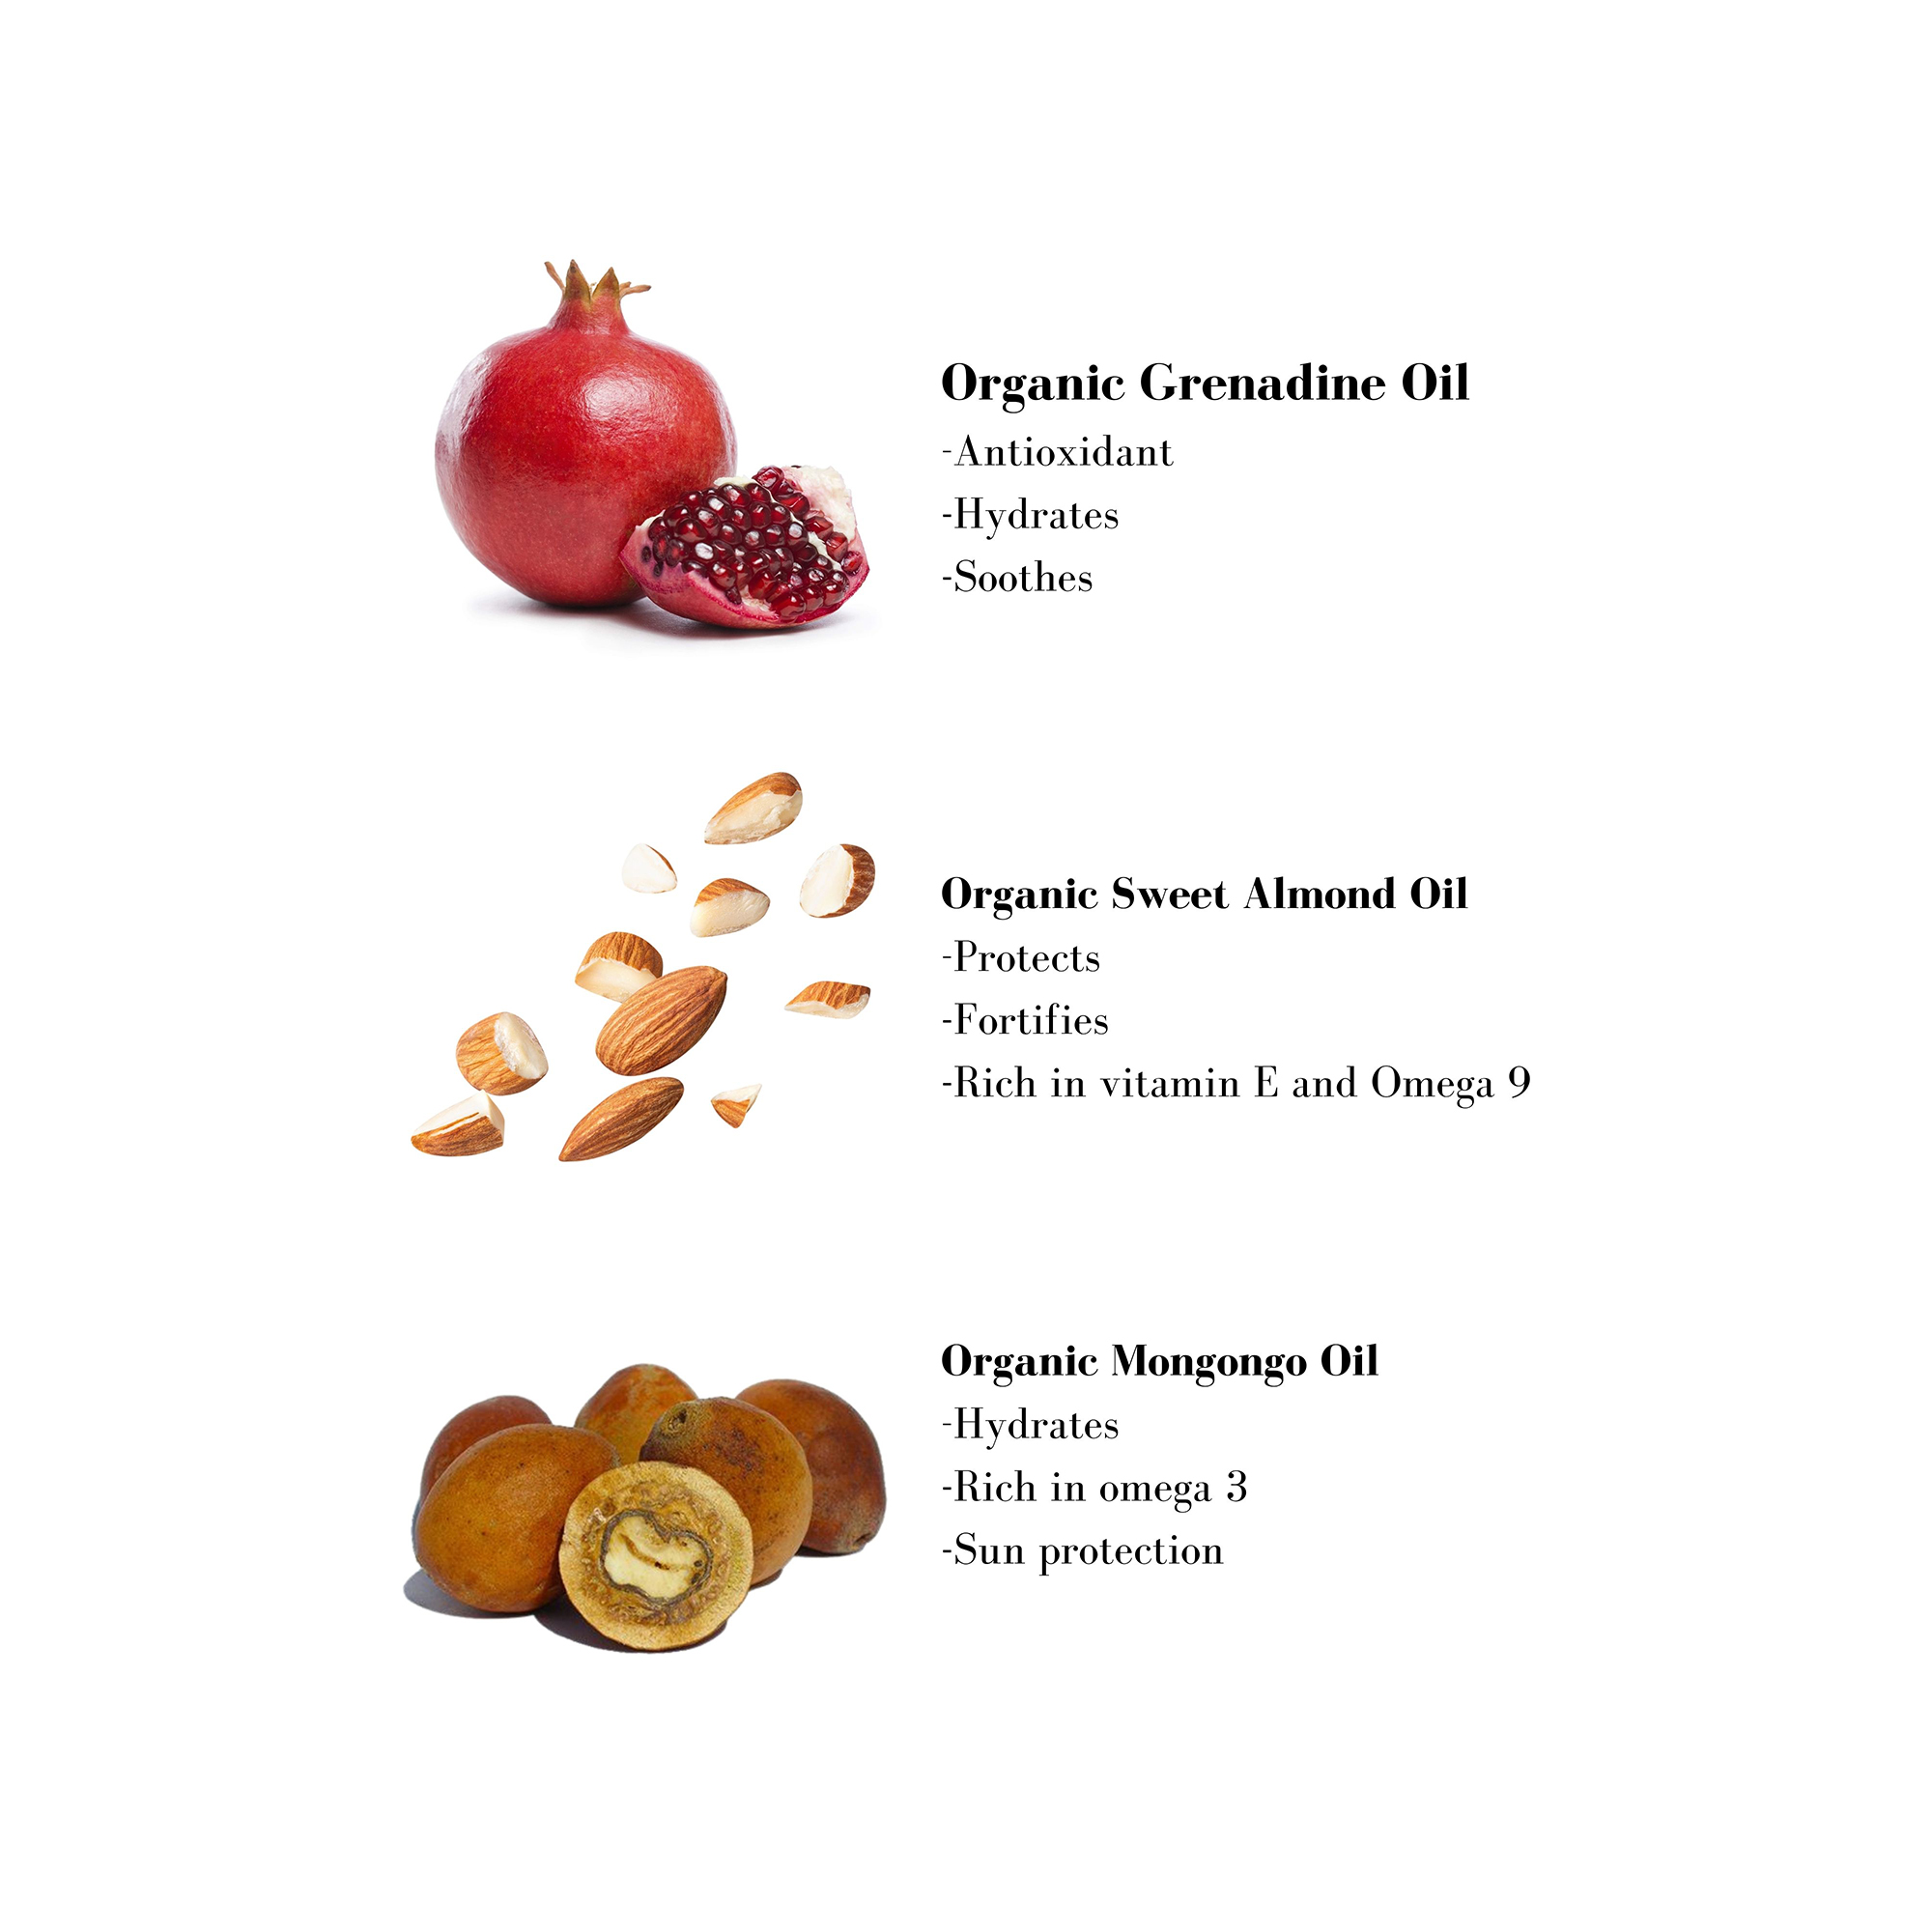 Image 1- Organic Grenadine Oil -Antioxidant -Hydrates -Soothes Organic Sweet Almond Oil -Protects -Fortifies - Rich in vitamin E and Omega 9 Organic Mongongo Oil -Hydrates -Rich in omega 3 -Sun protection